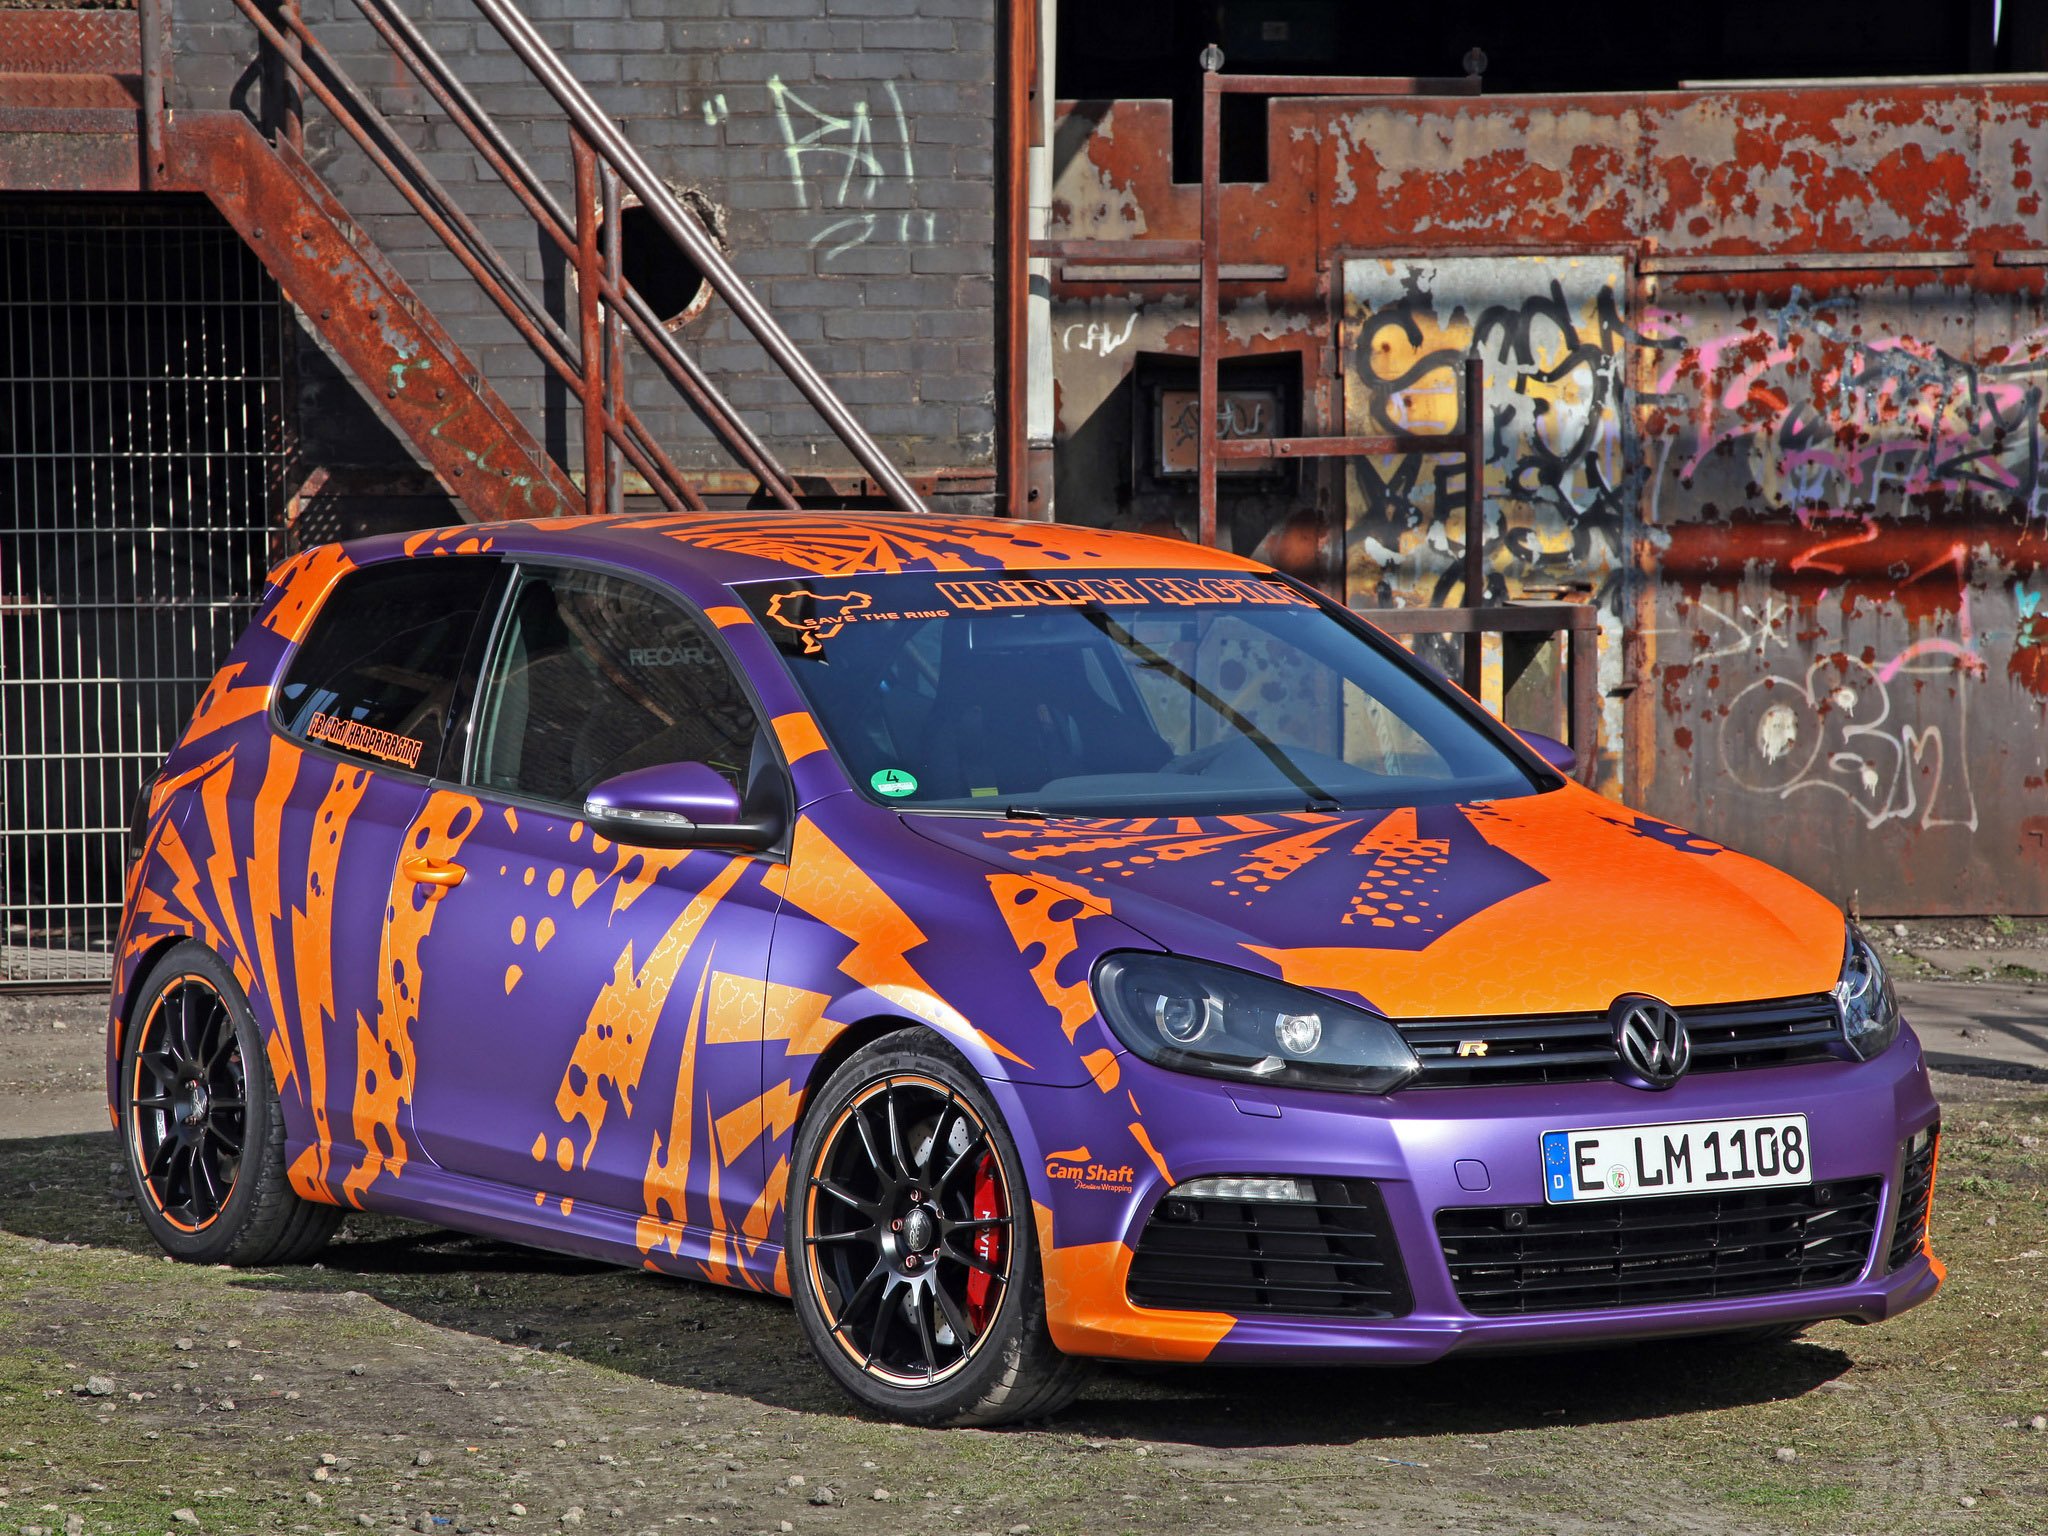 cam, Shaft, Volkswagen, Golf, R, Haiopai, Racing, 2014, Tuning, Wrapping Wallpaper